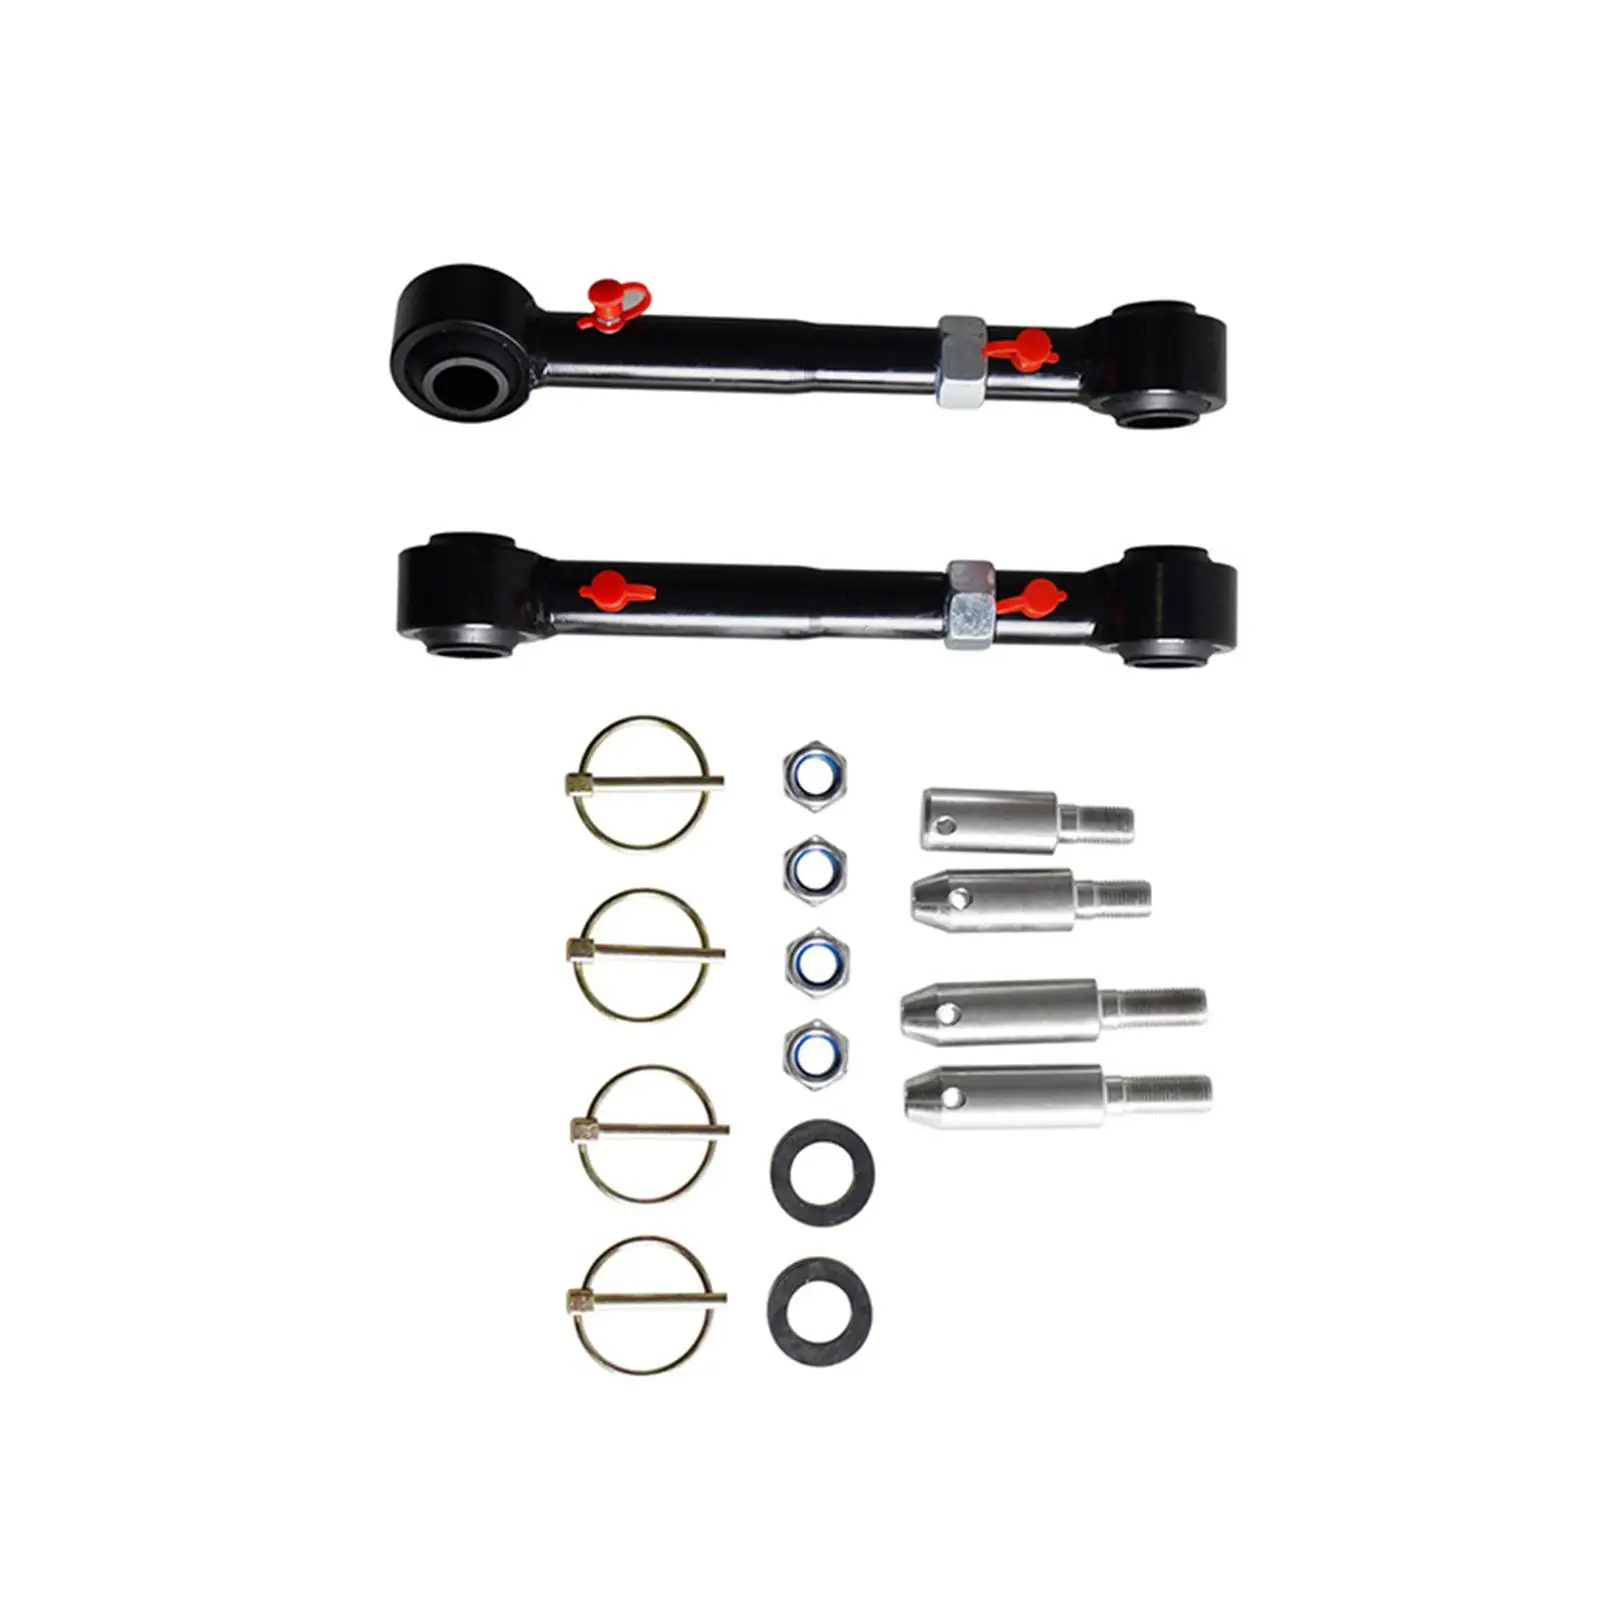 Front Swaybar Quicker Disconnect System Replaces for JK 2007-2018